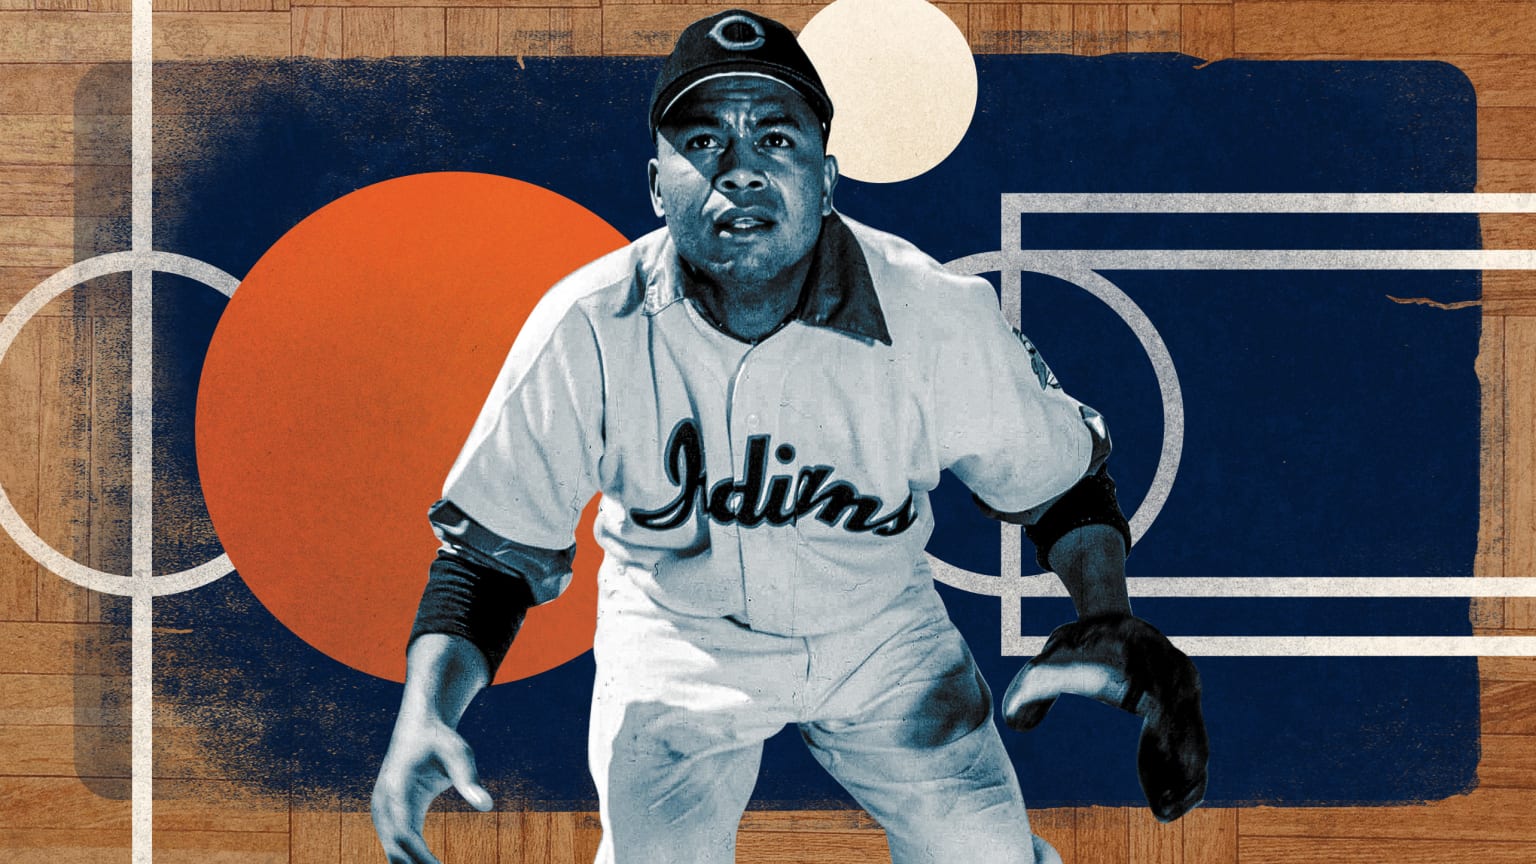 Basketball may have been Larry Doby's best sport